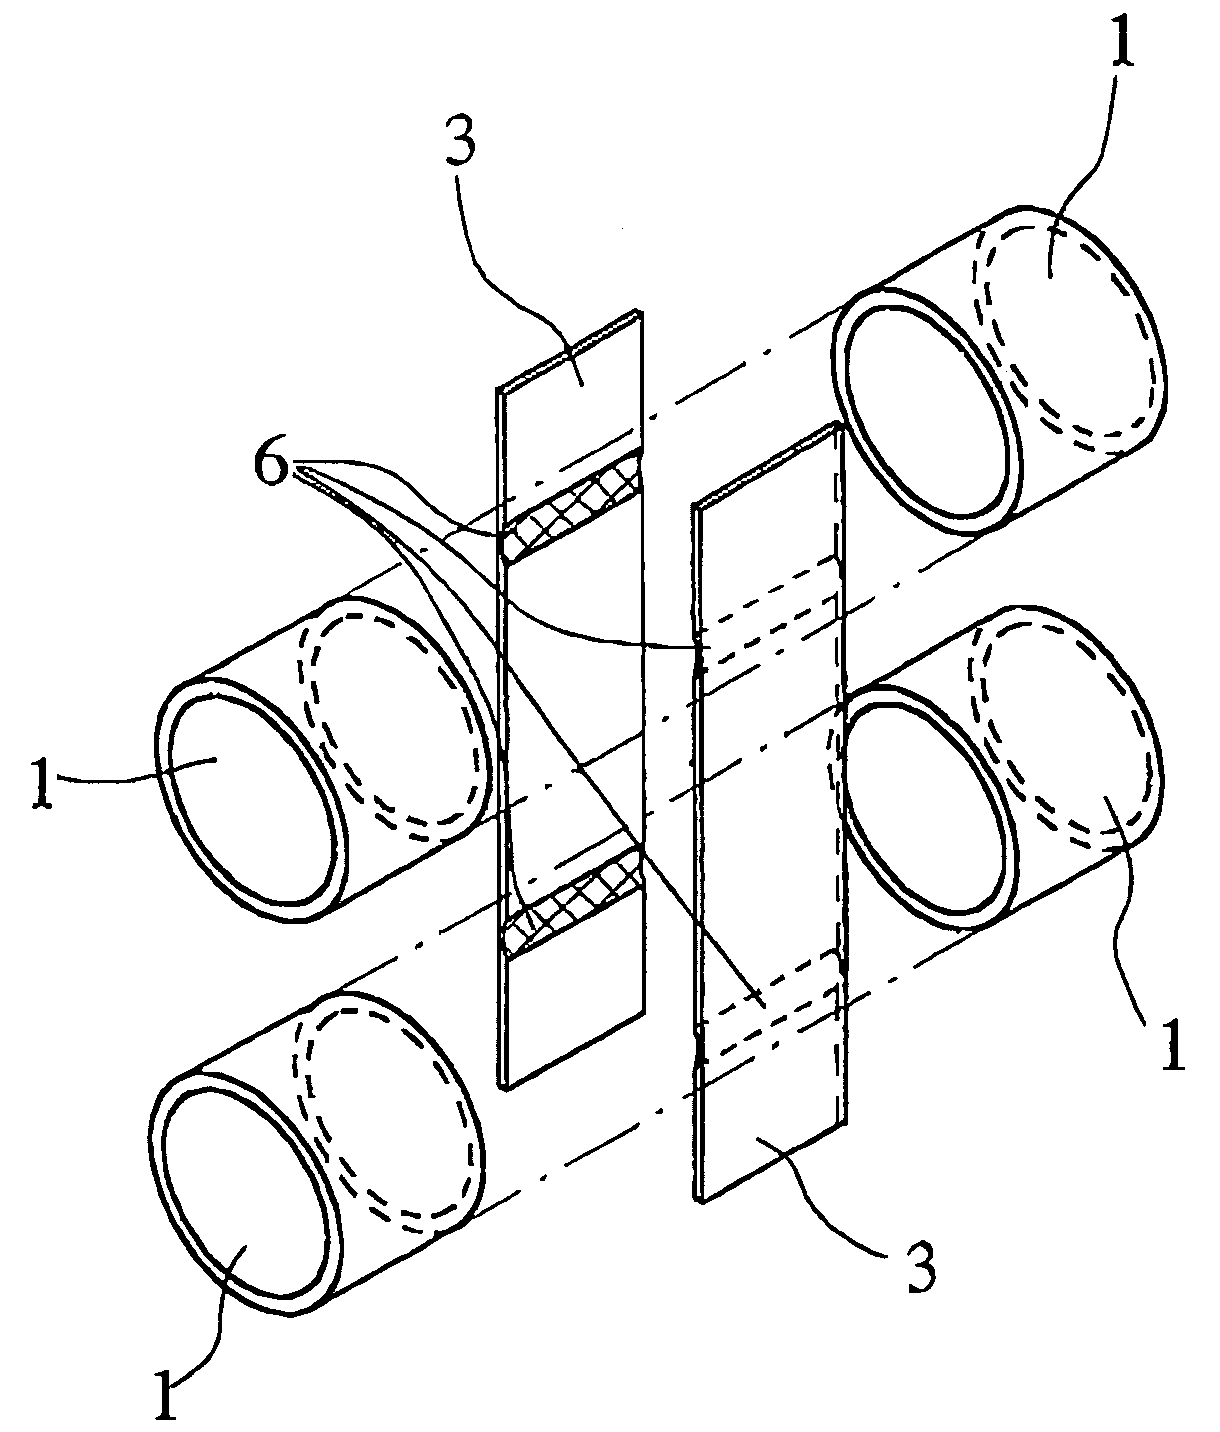 Mass flow meter composed of two measuring tubes with a connecting device between them